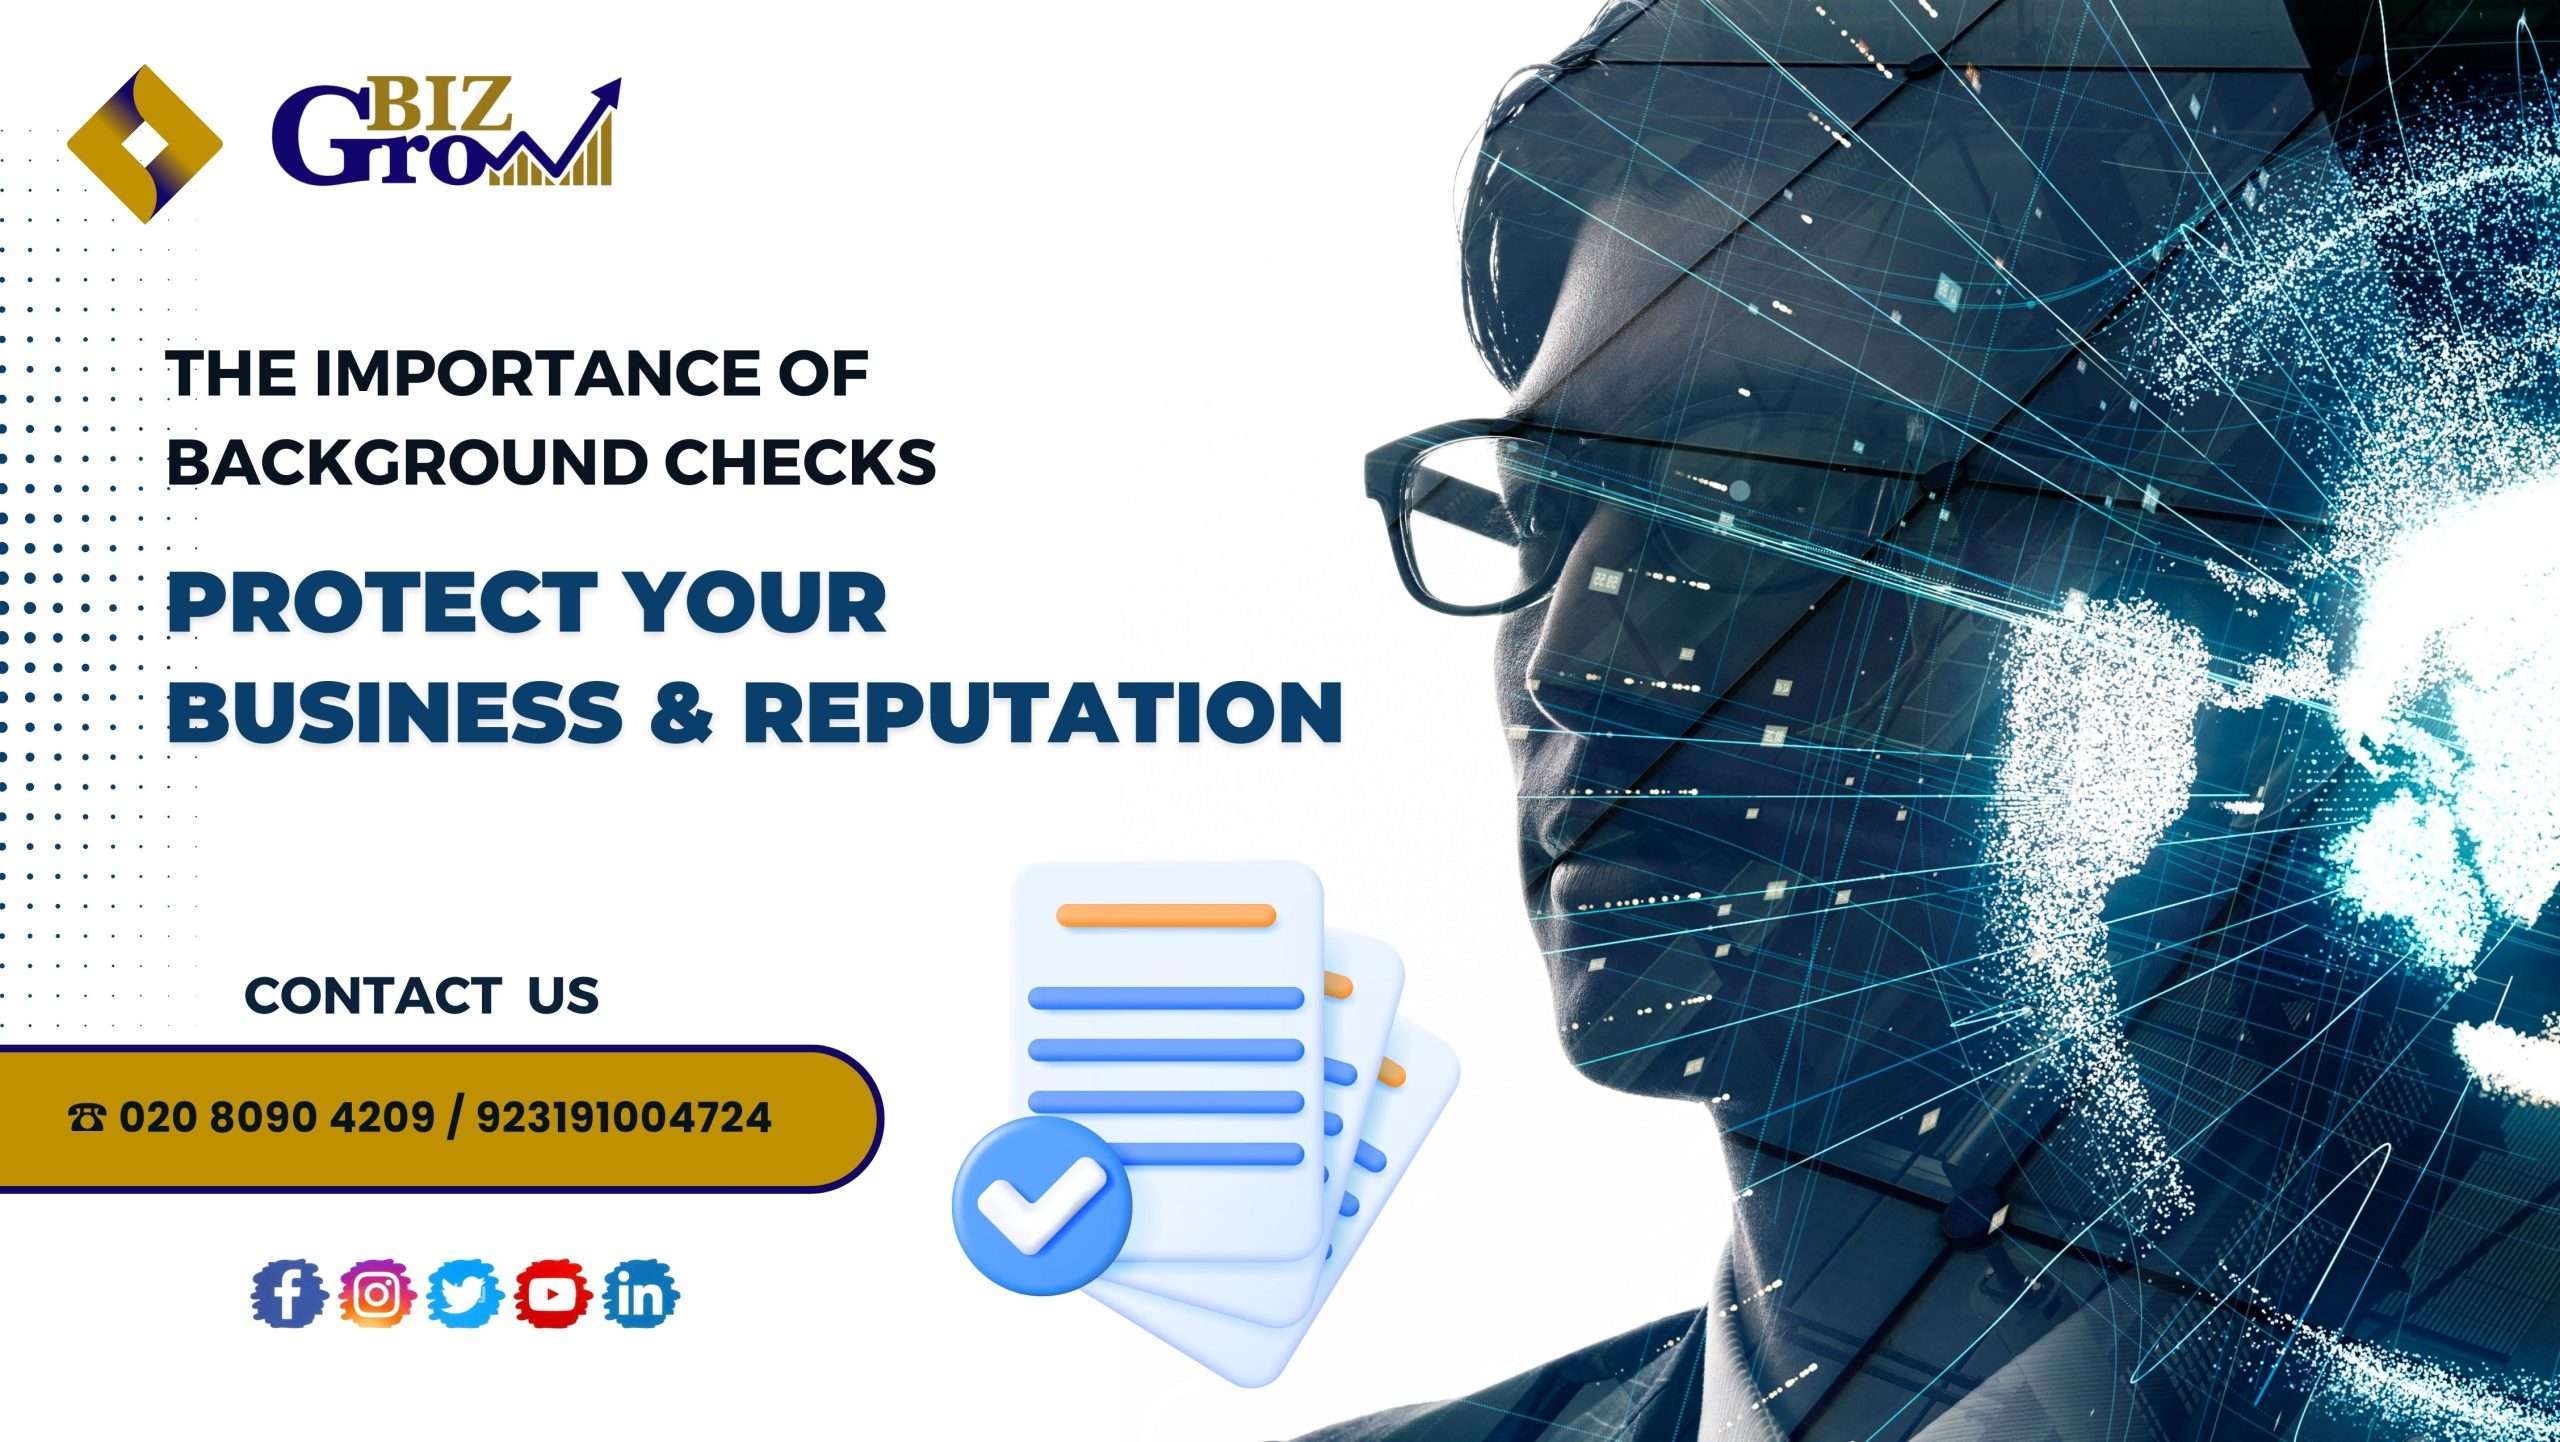 Safeguard your business and reputation with thorough background checks